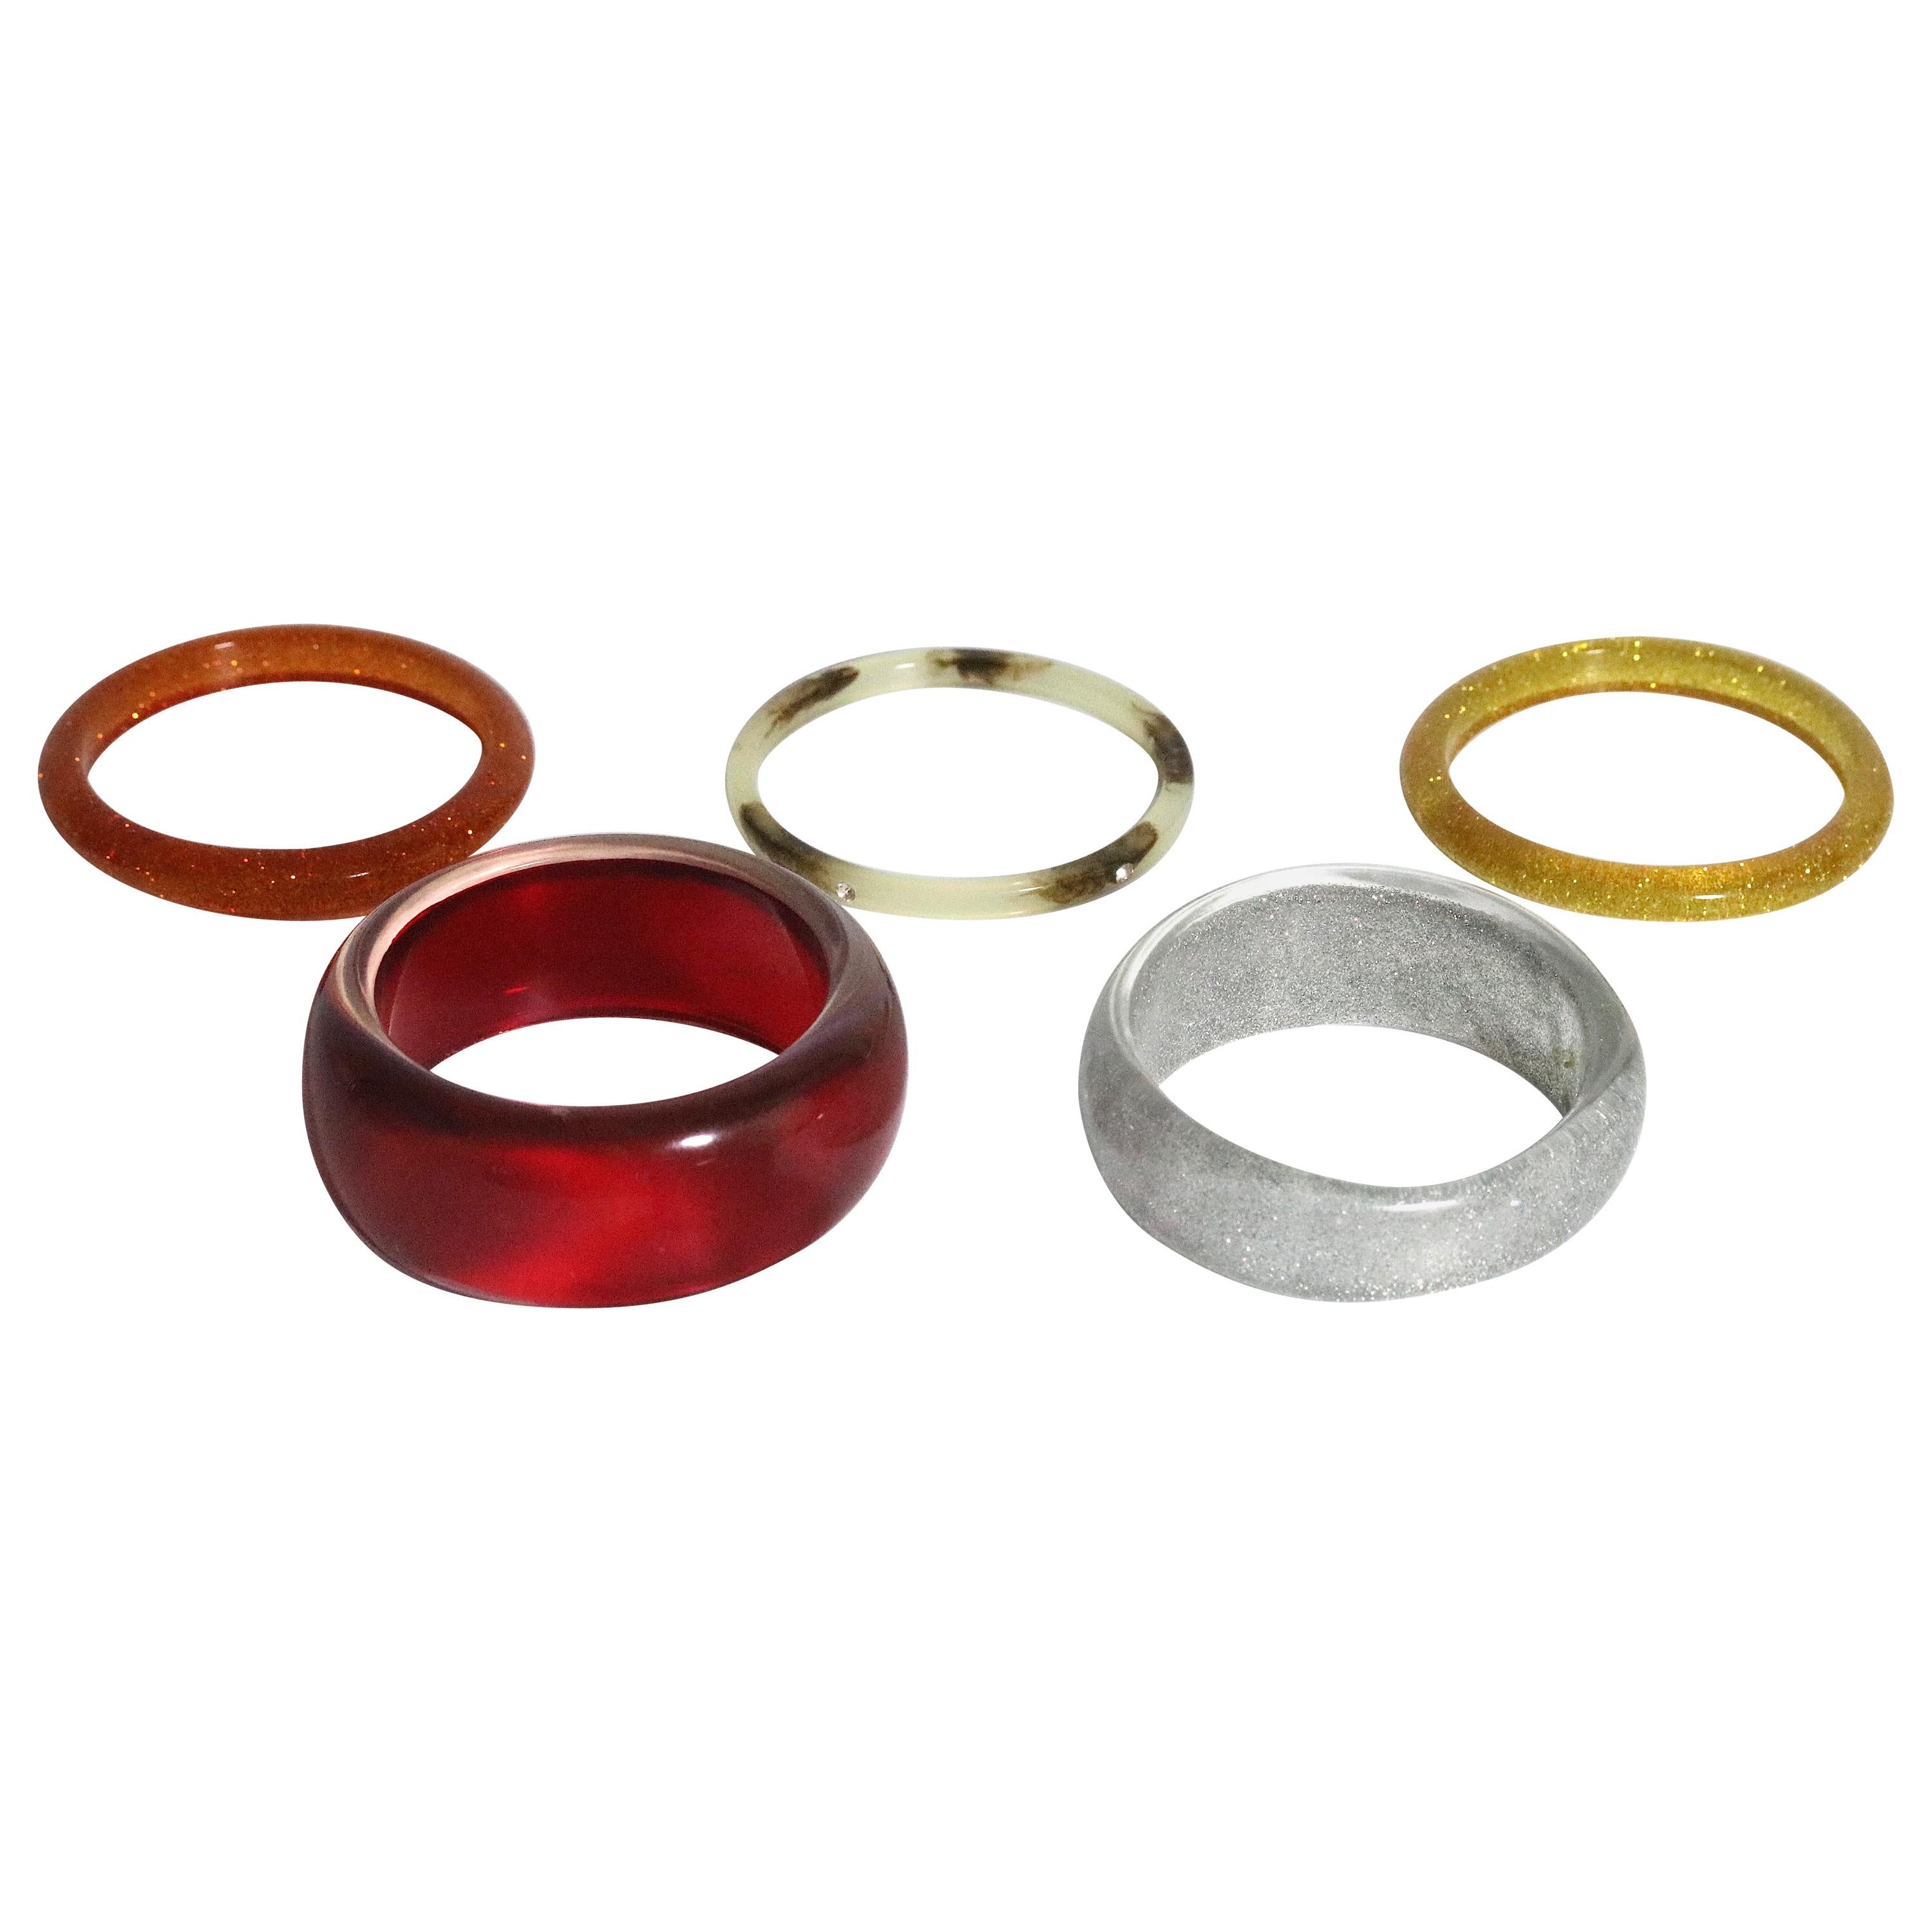 Collection 5 Thermoplastic & A. Bittar Bangle Bracelets-1950s to 1990 For Sale